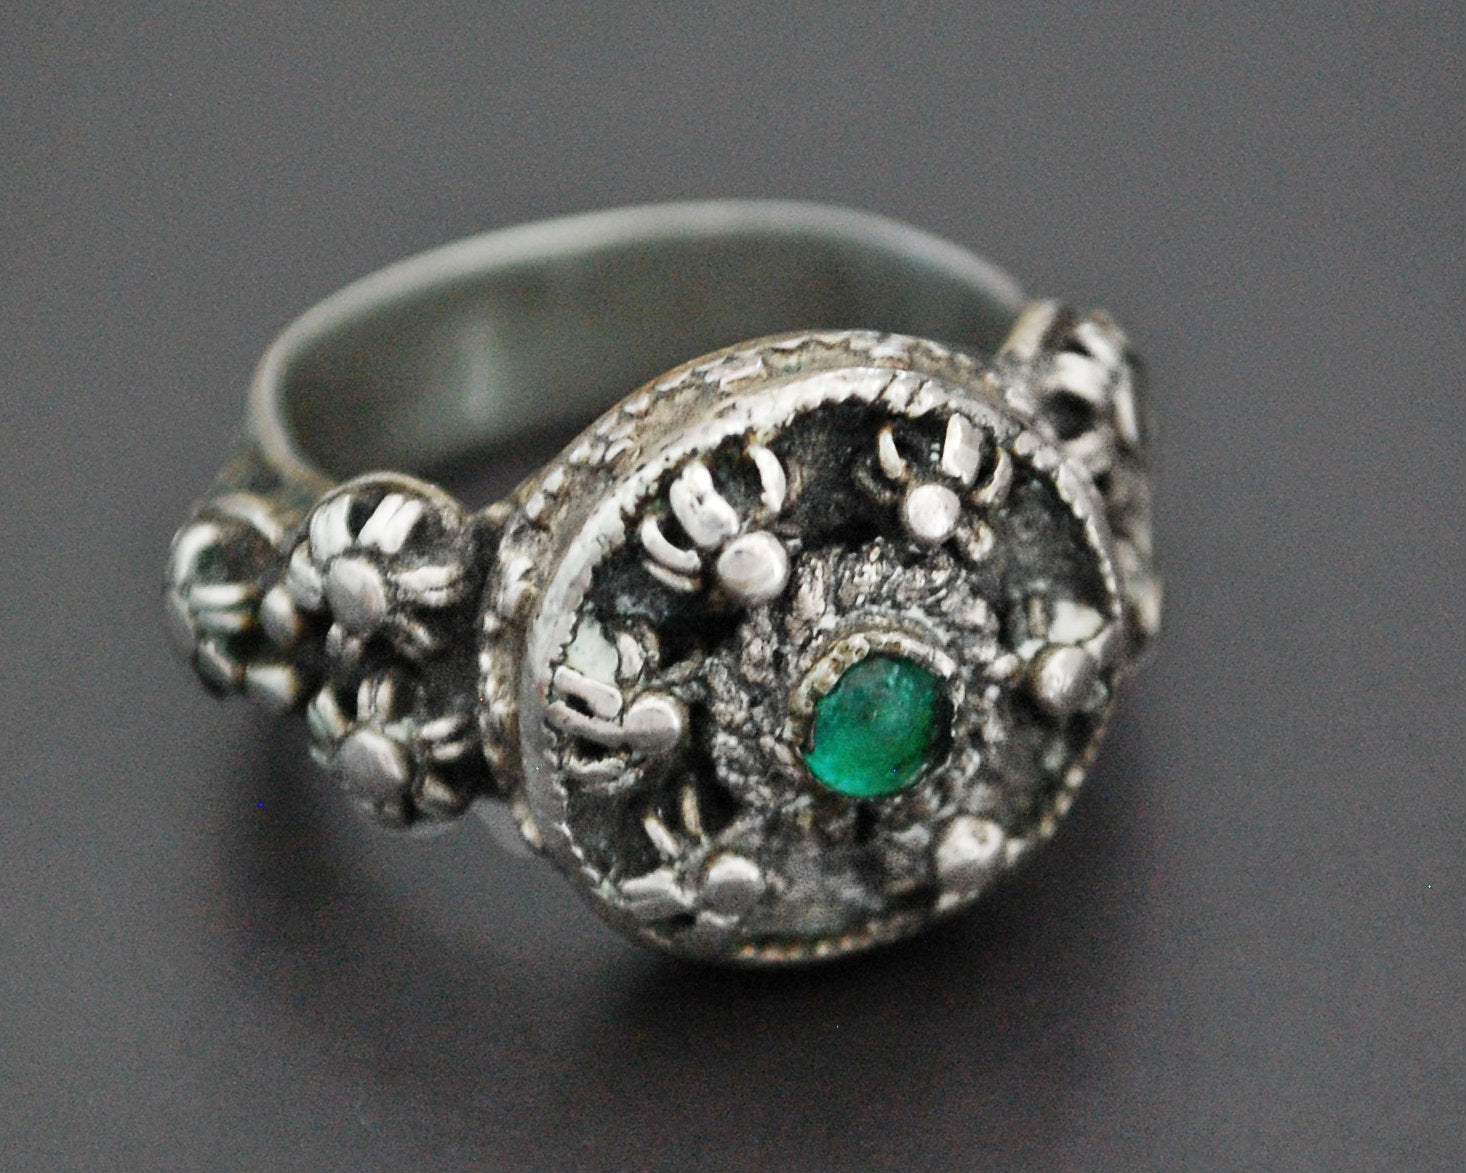 Antique Yemeni Ring with Green Glass - Size 9.5